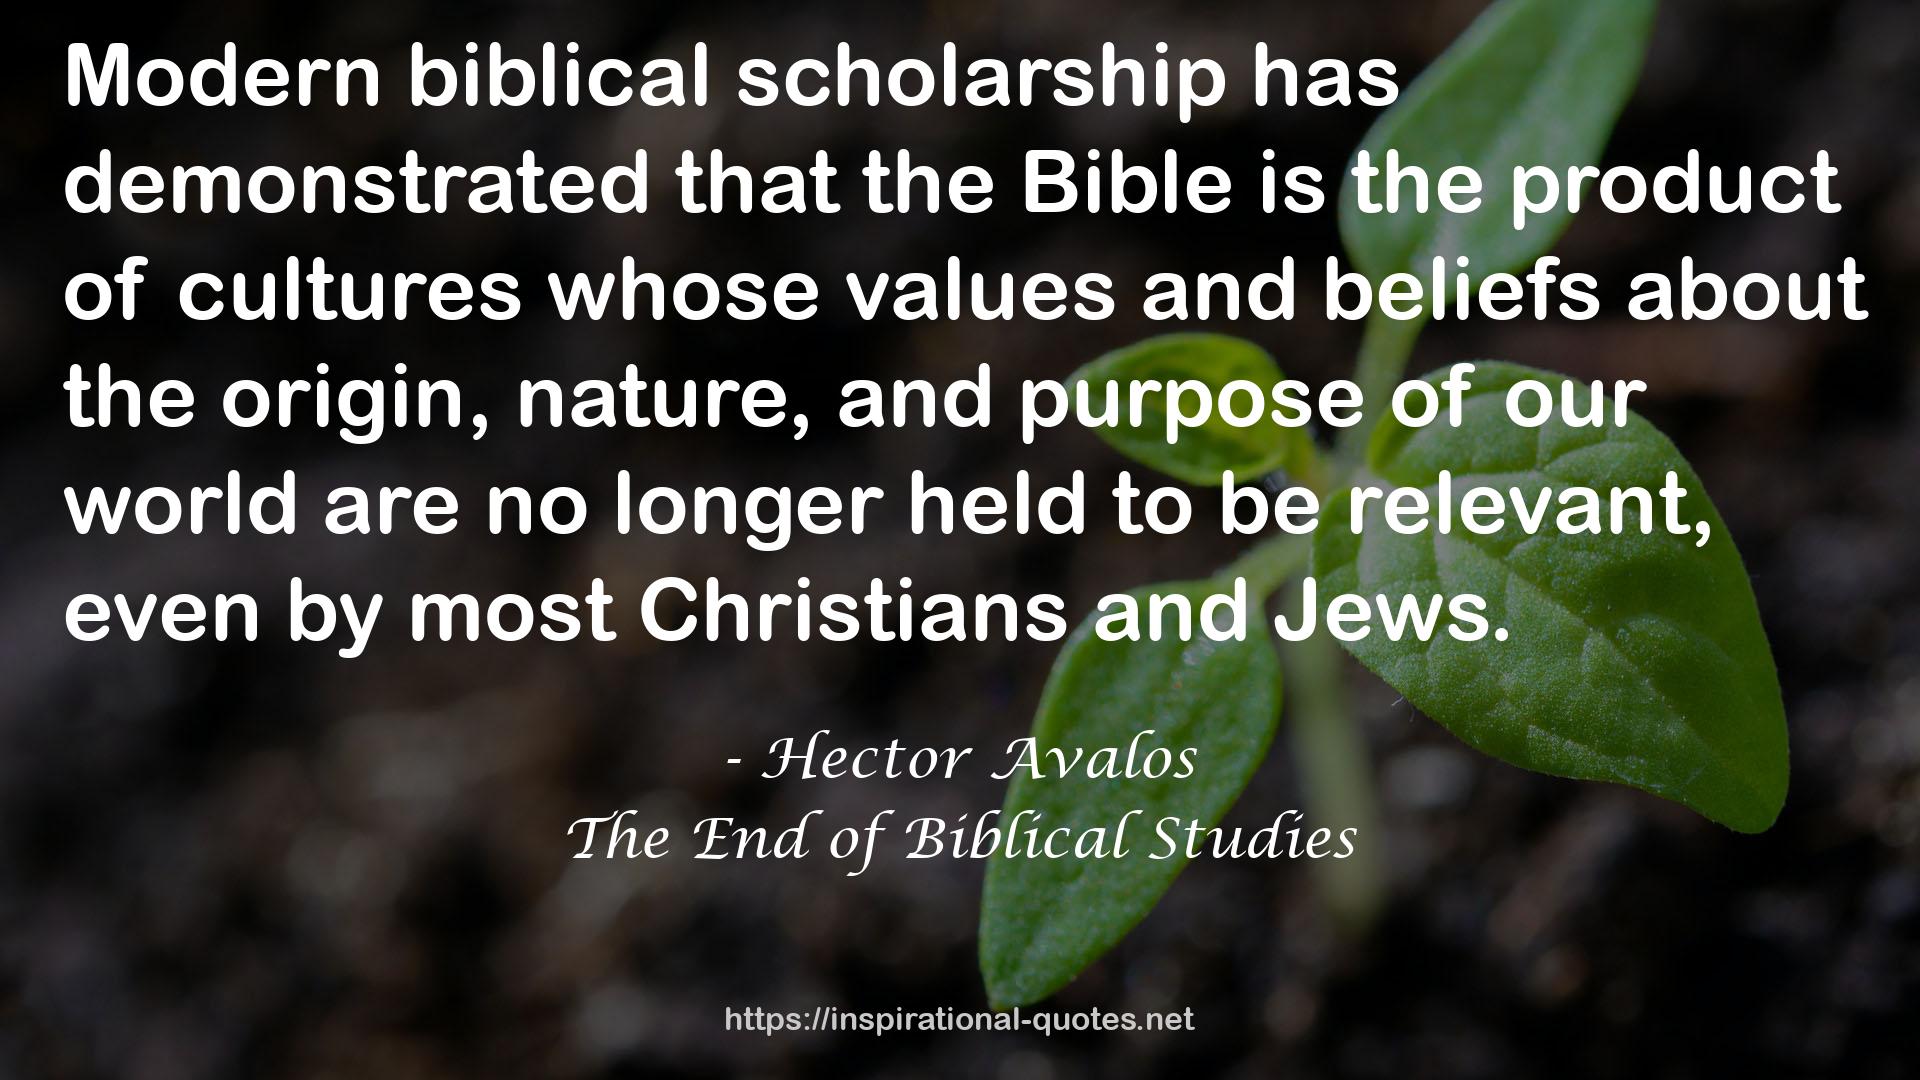 The End of Biblical Studies QUOTES